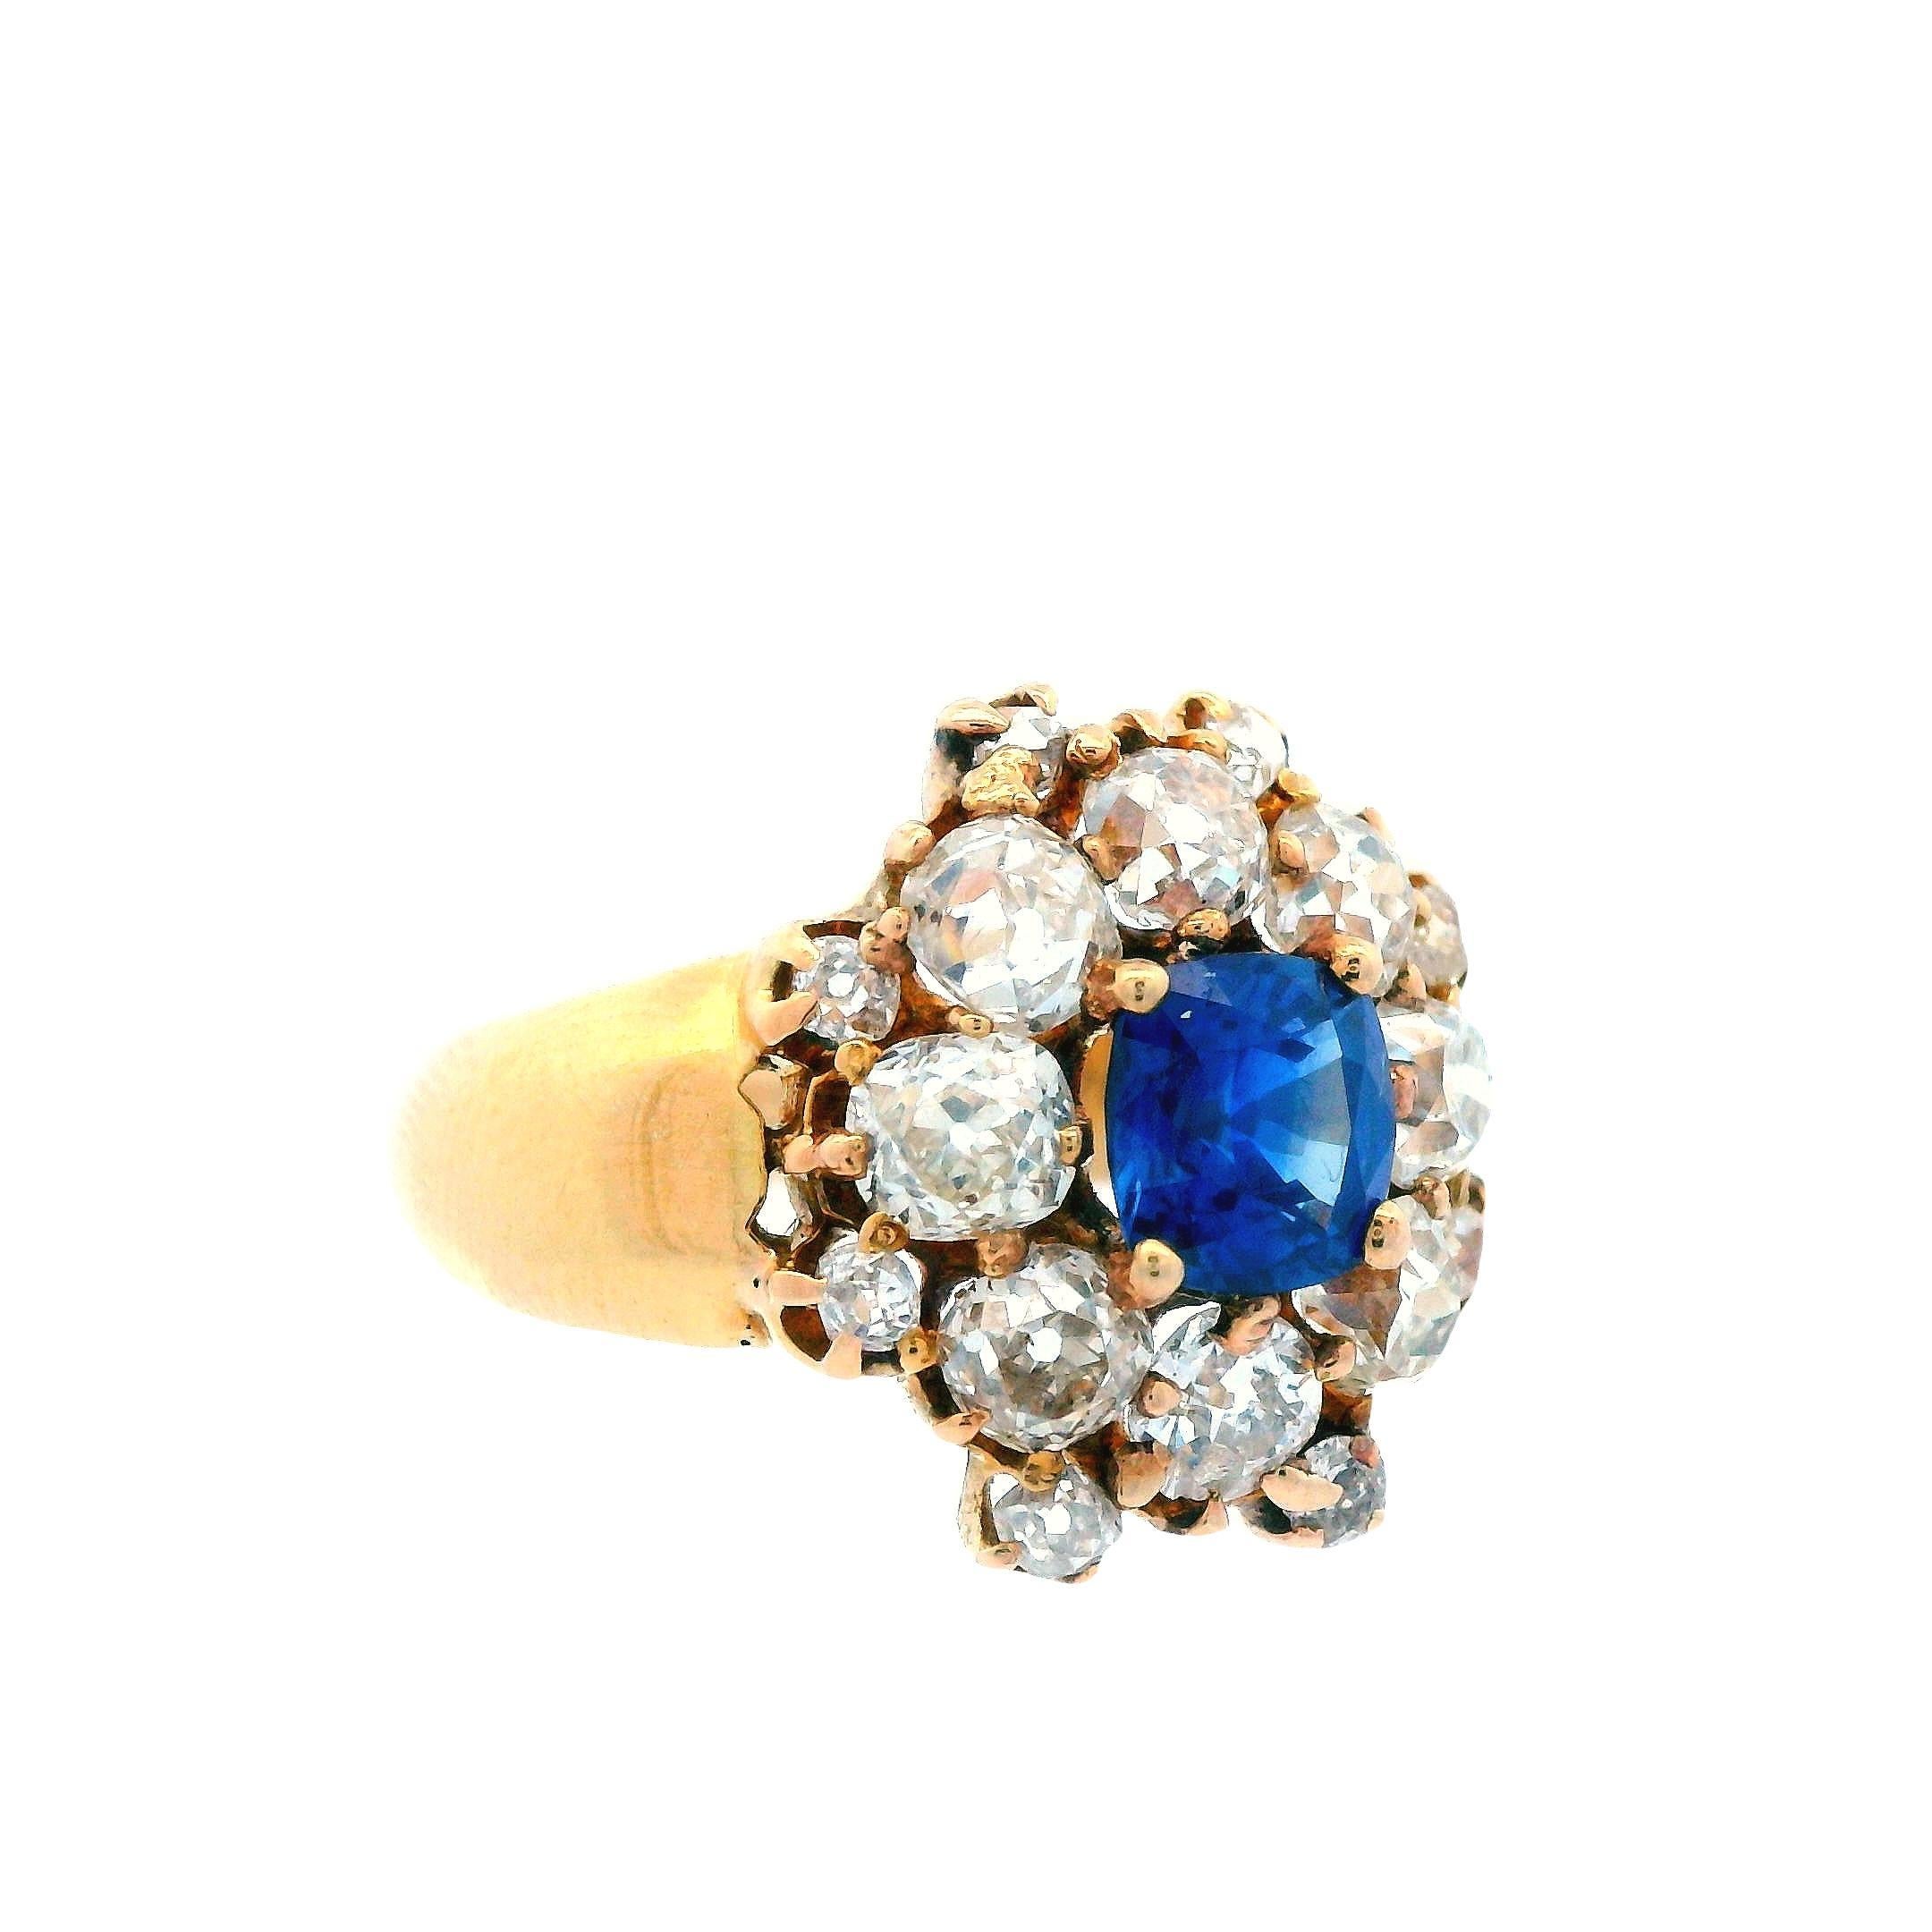 Cabochon 1890 Victorian 18K Yellow Gold Sapphire and Diamond Ring